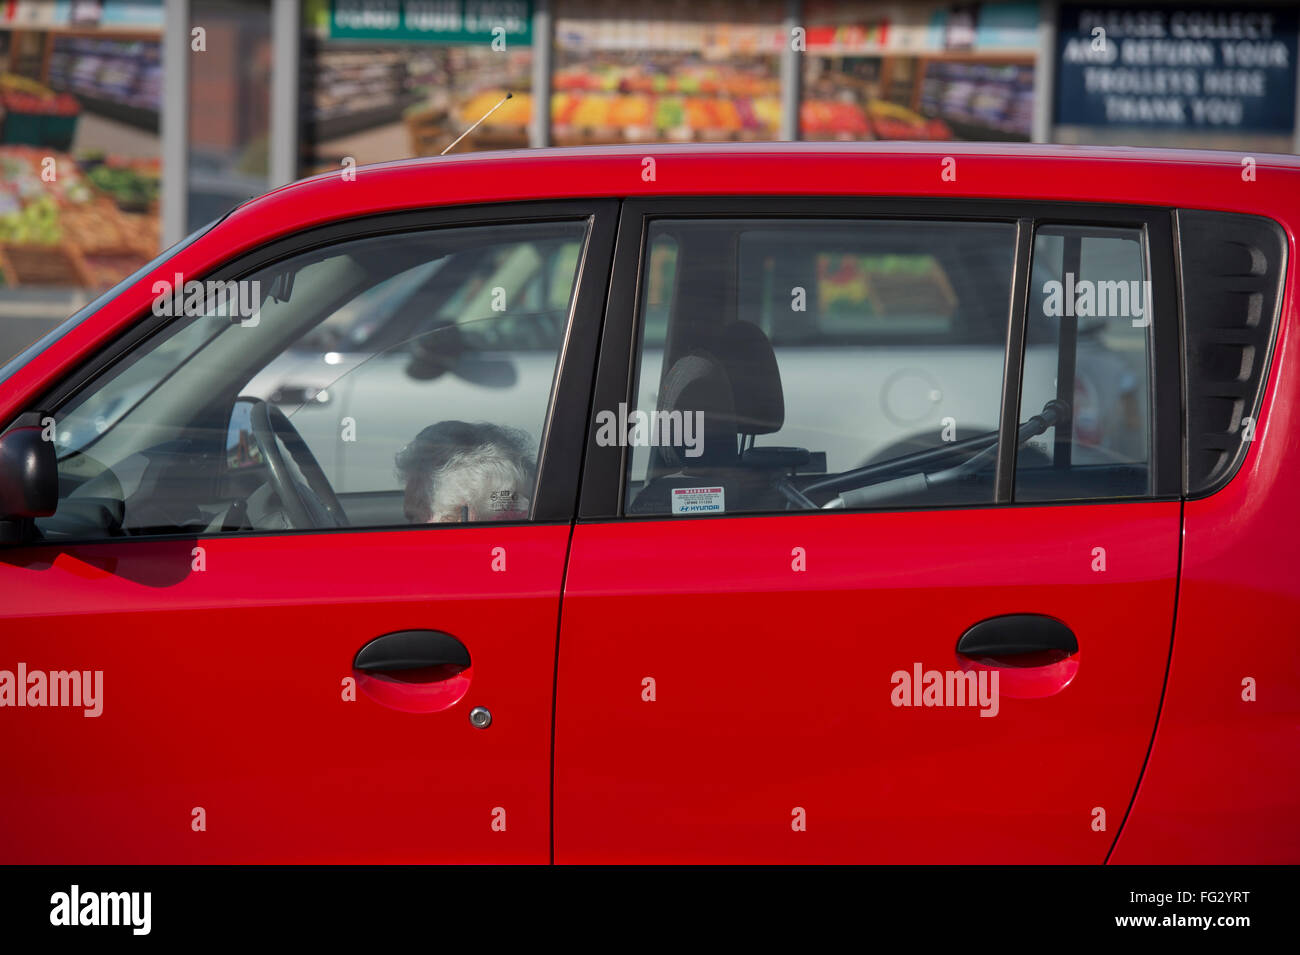 Little, elderly, grey-haired lady, sits in the passenger seat of a red car, so small she is barely visible above the door - England, GB, UK. Stock Photo